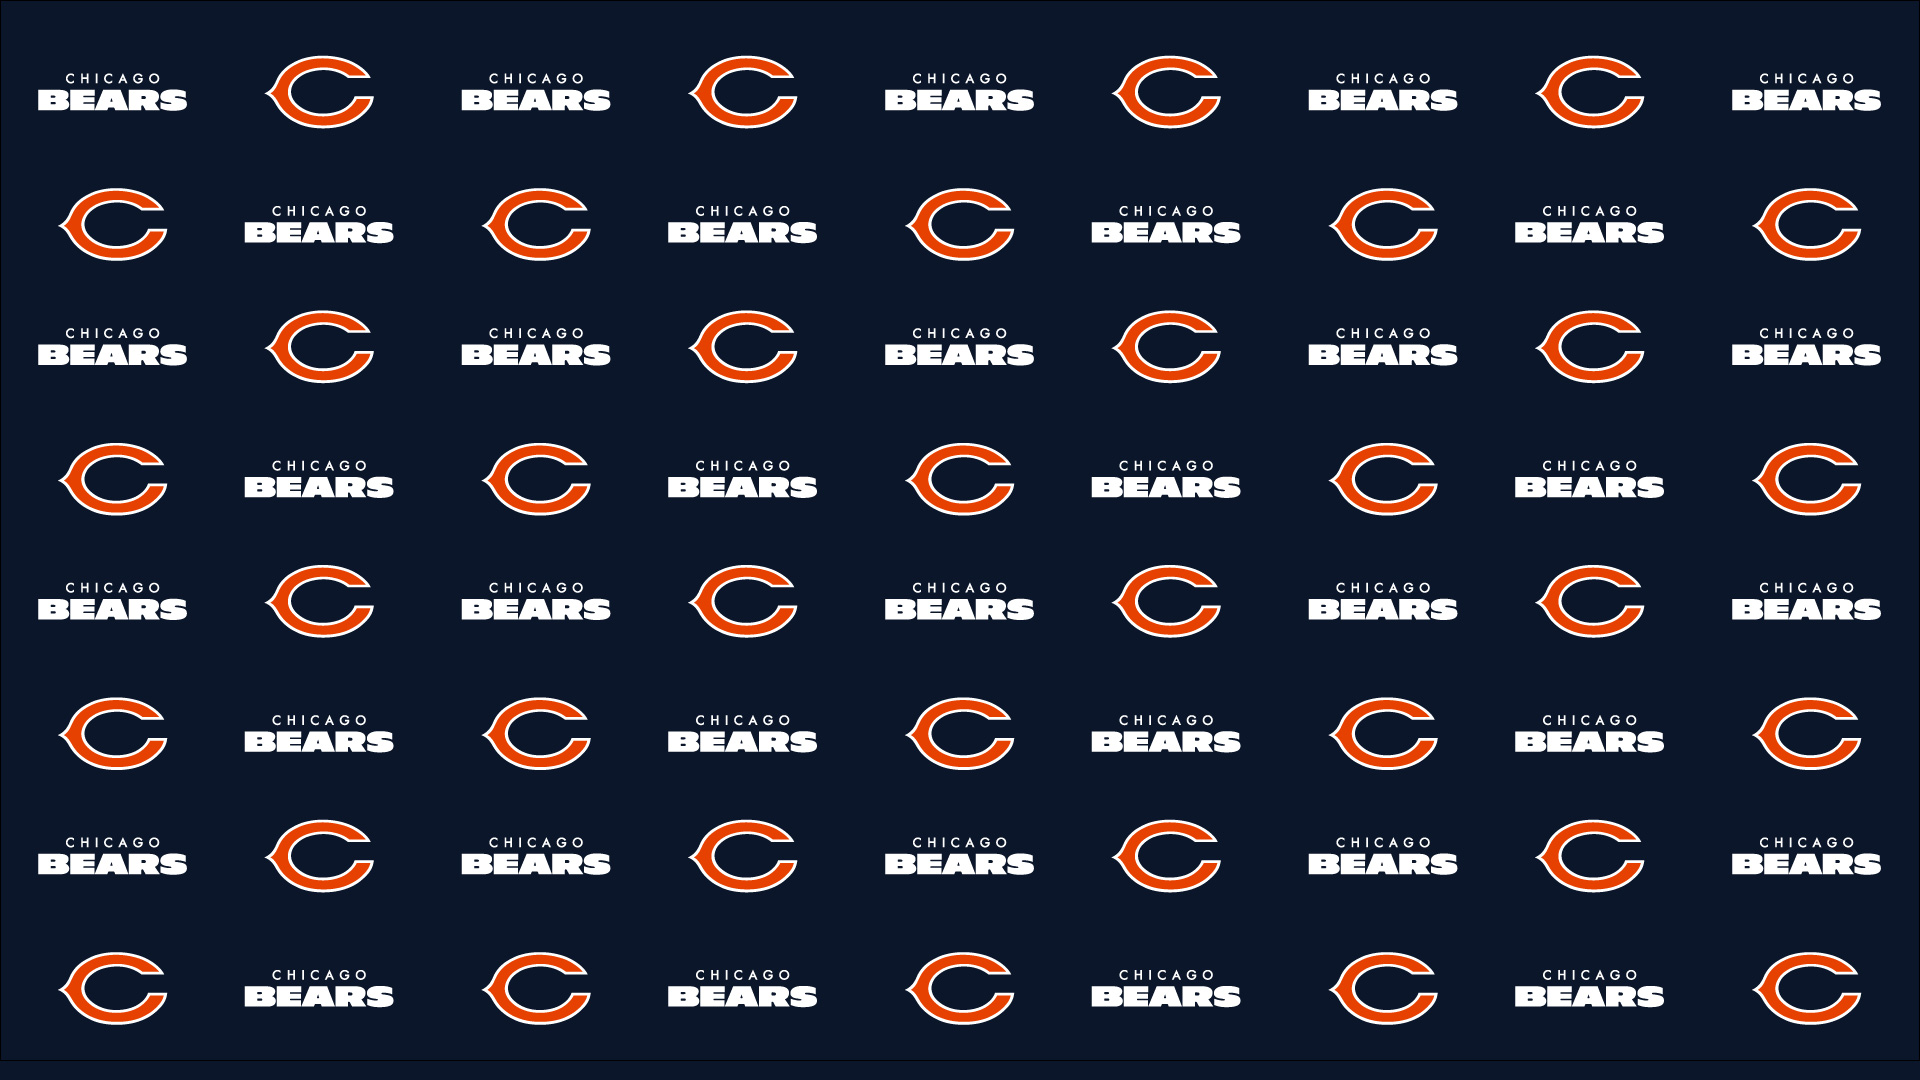 Video Conference Background. Chicago Bears Official Website